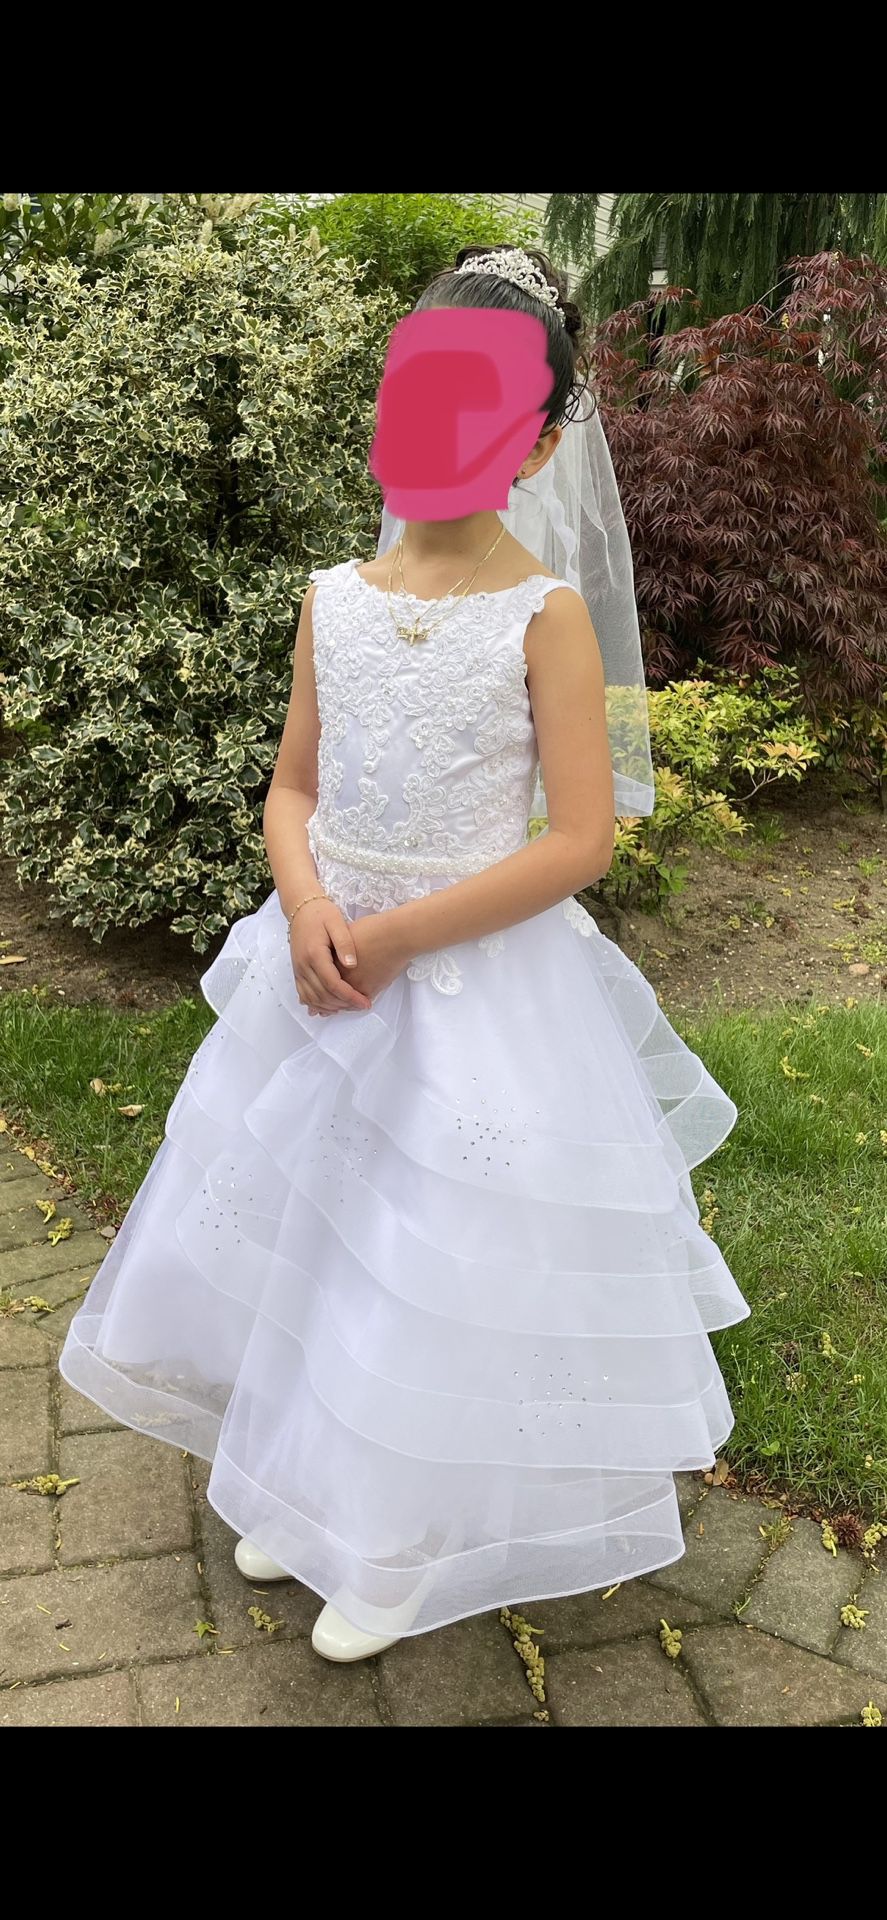 Girls Communion/ Flower Girl Dress, Vail And Shoes